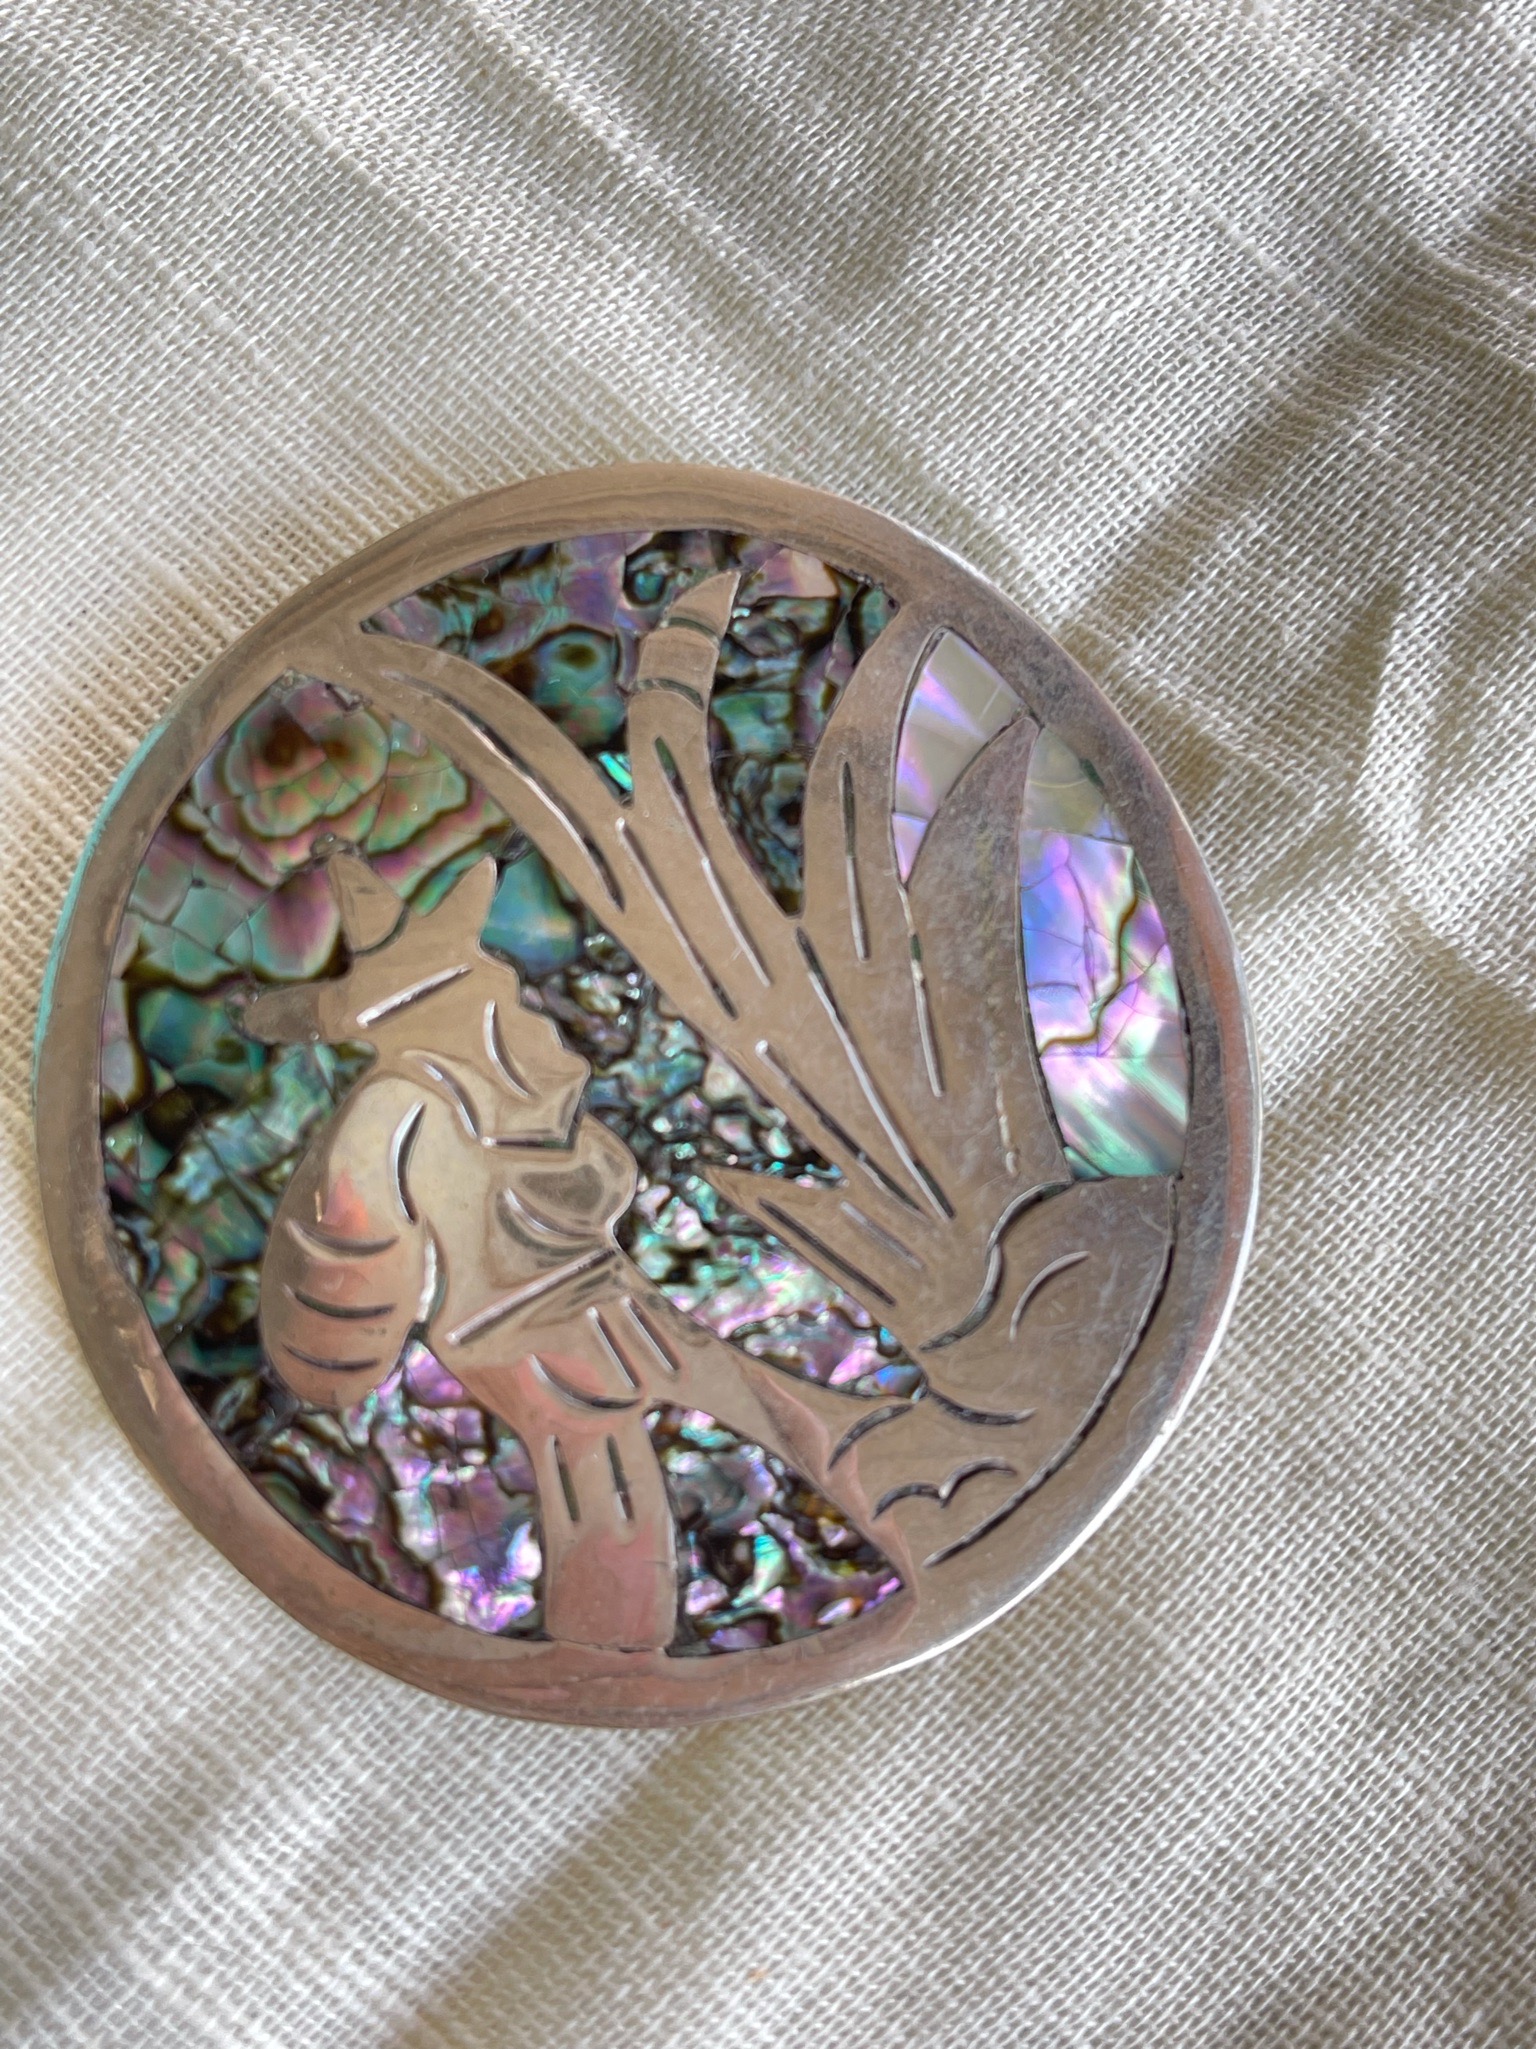 Beautiful Vintage Sterling Silver Abalone Decorative Silver Abalone Brooch